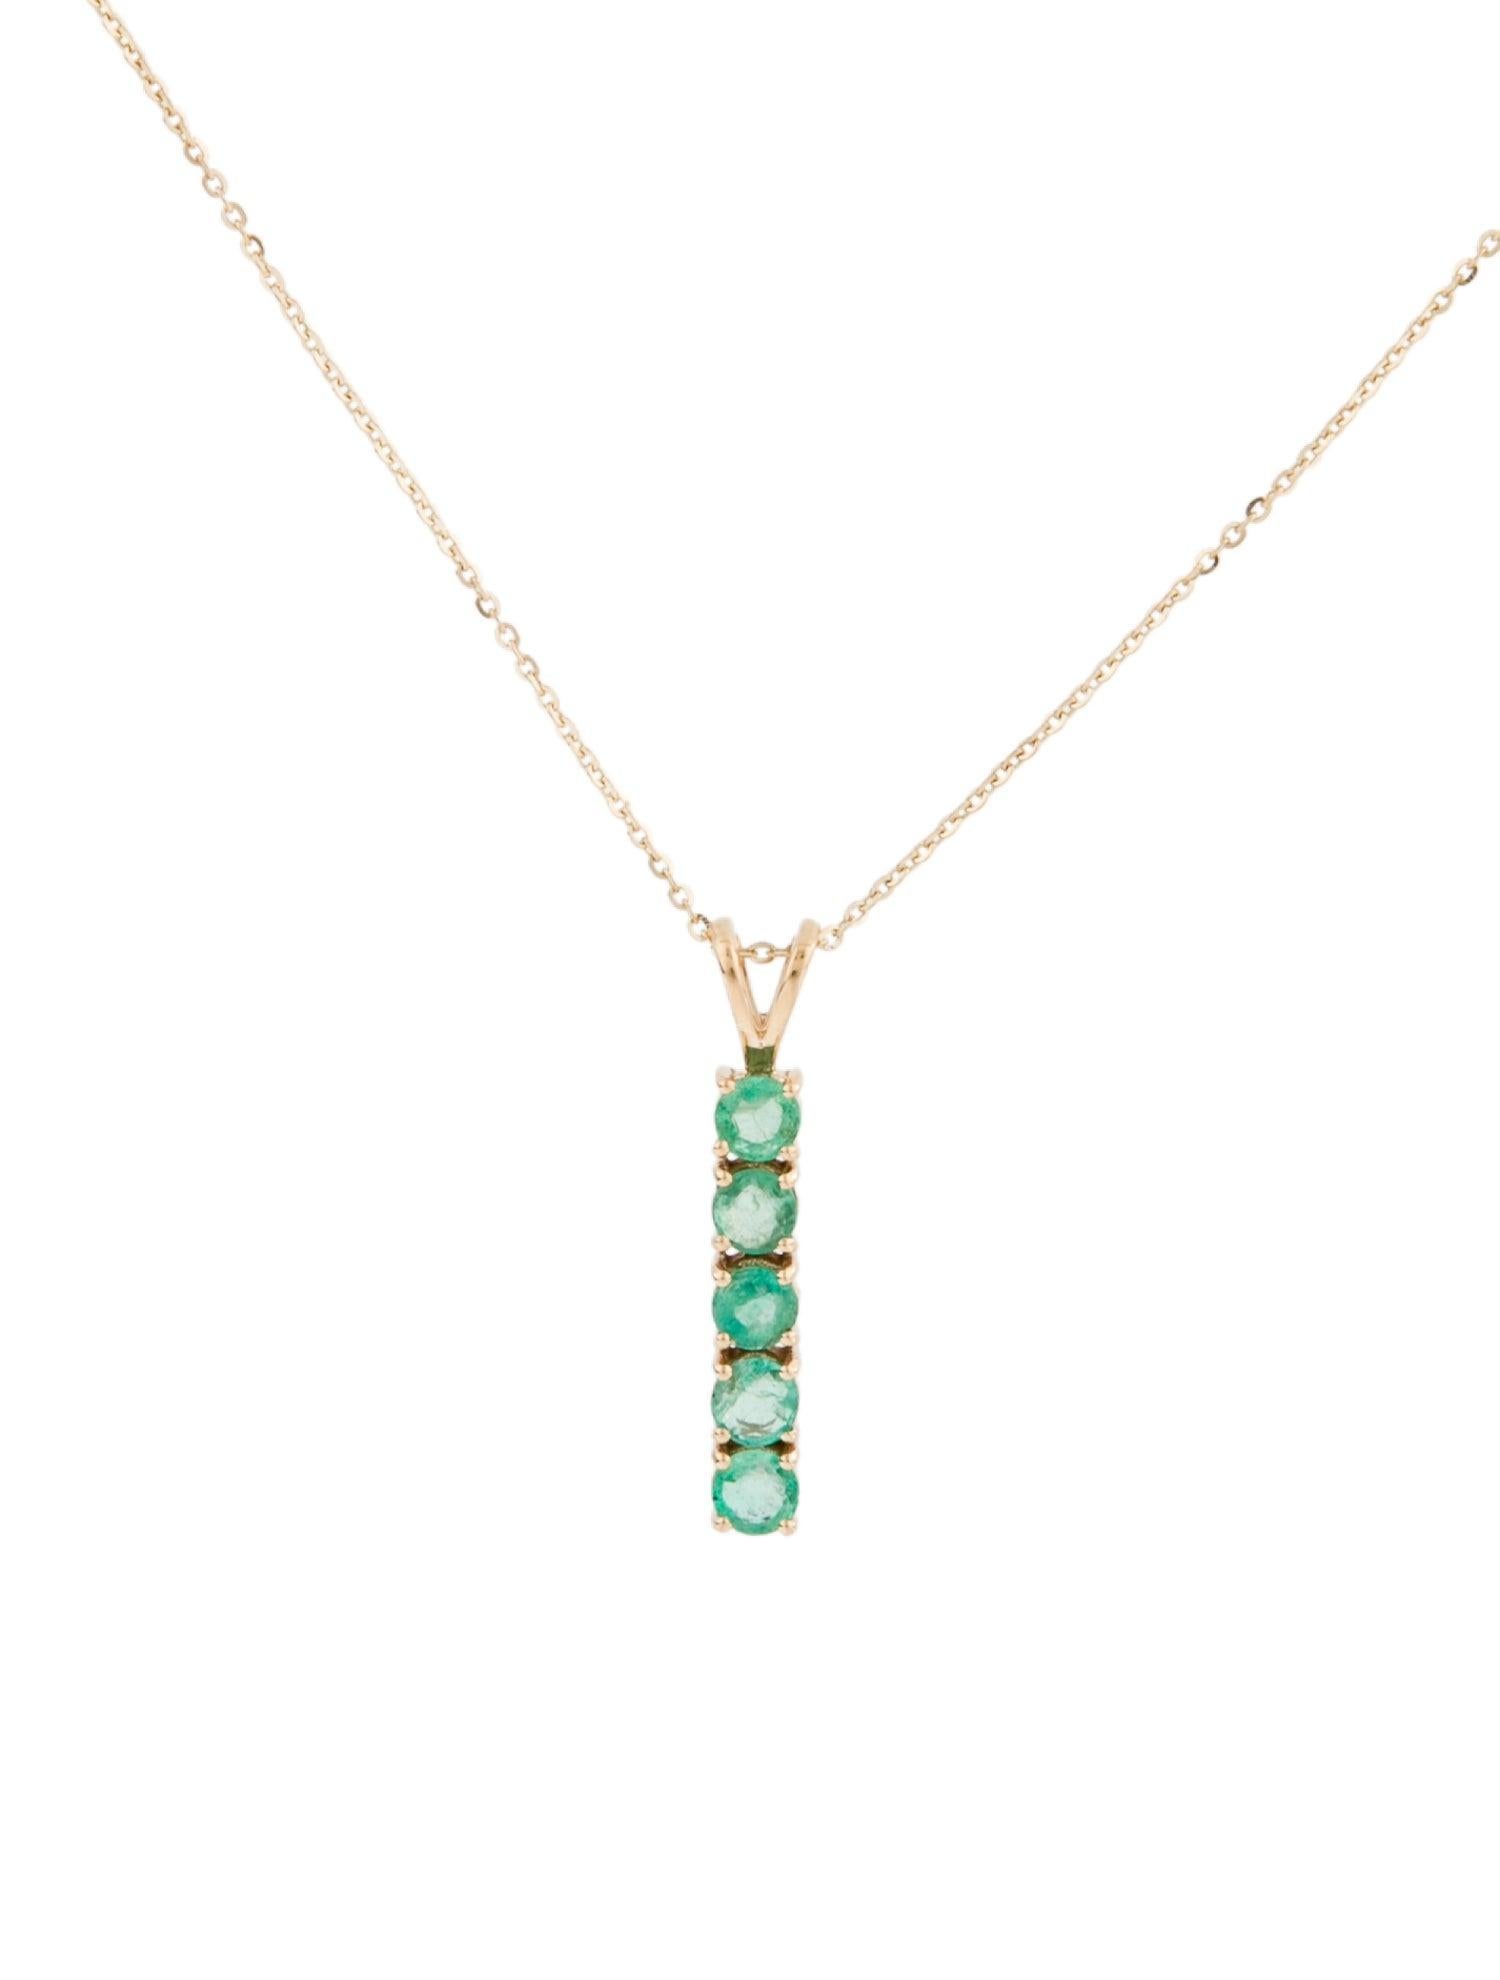 Elegant 14K Emerald Pendant Necklace: Exquisite Luxury Statement Jewelry Piece In New Condition For Sale In Holtsville, NY